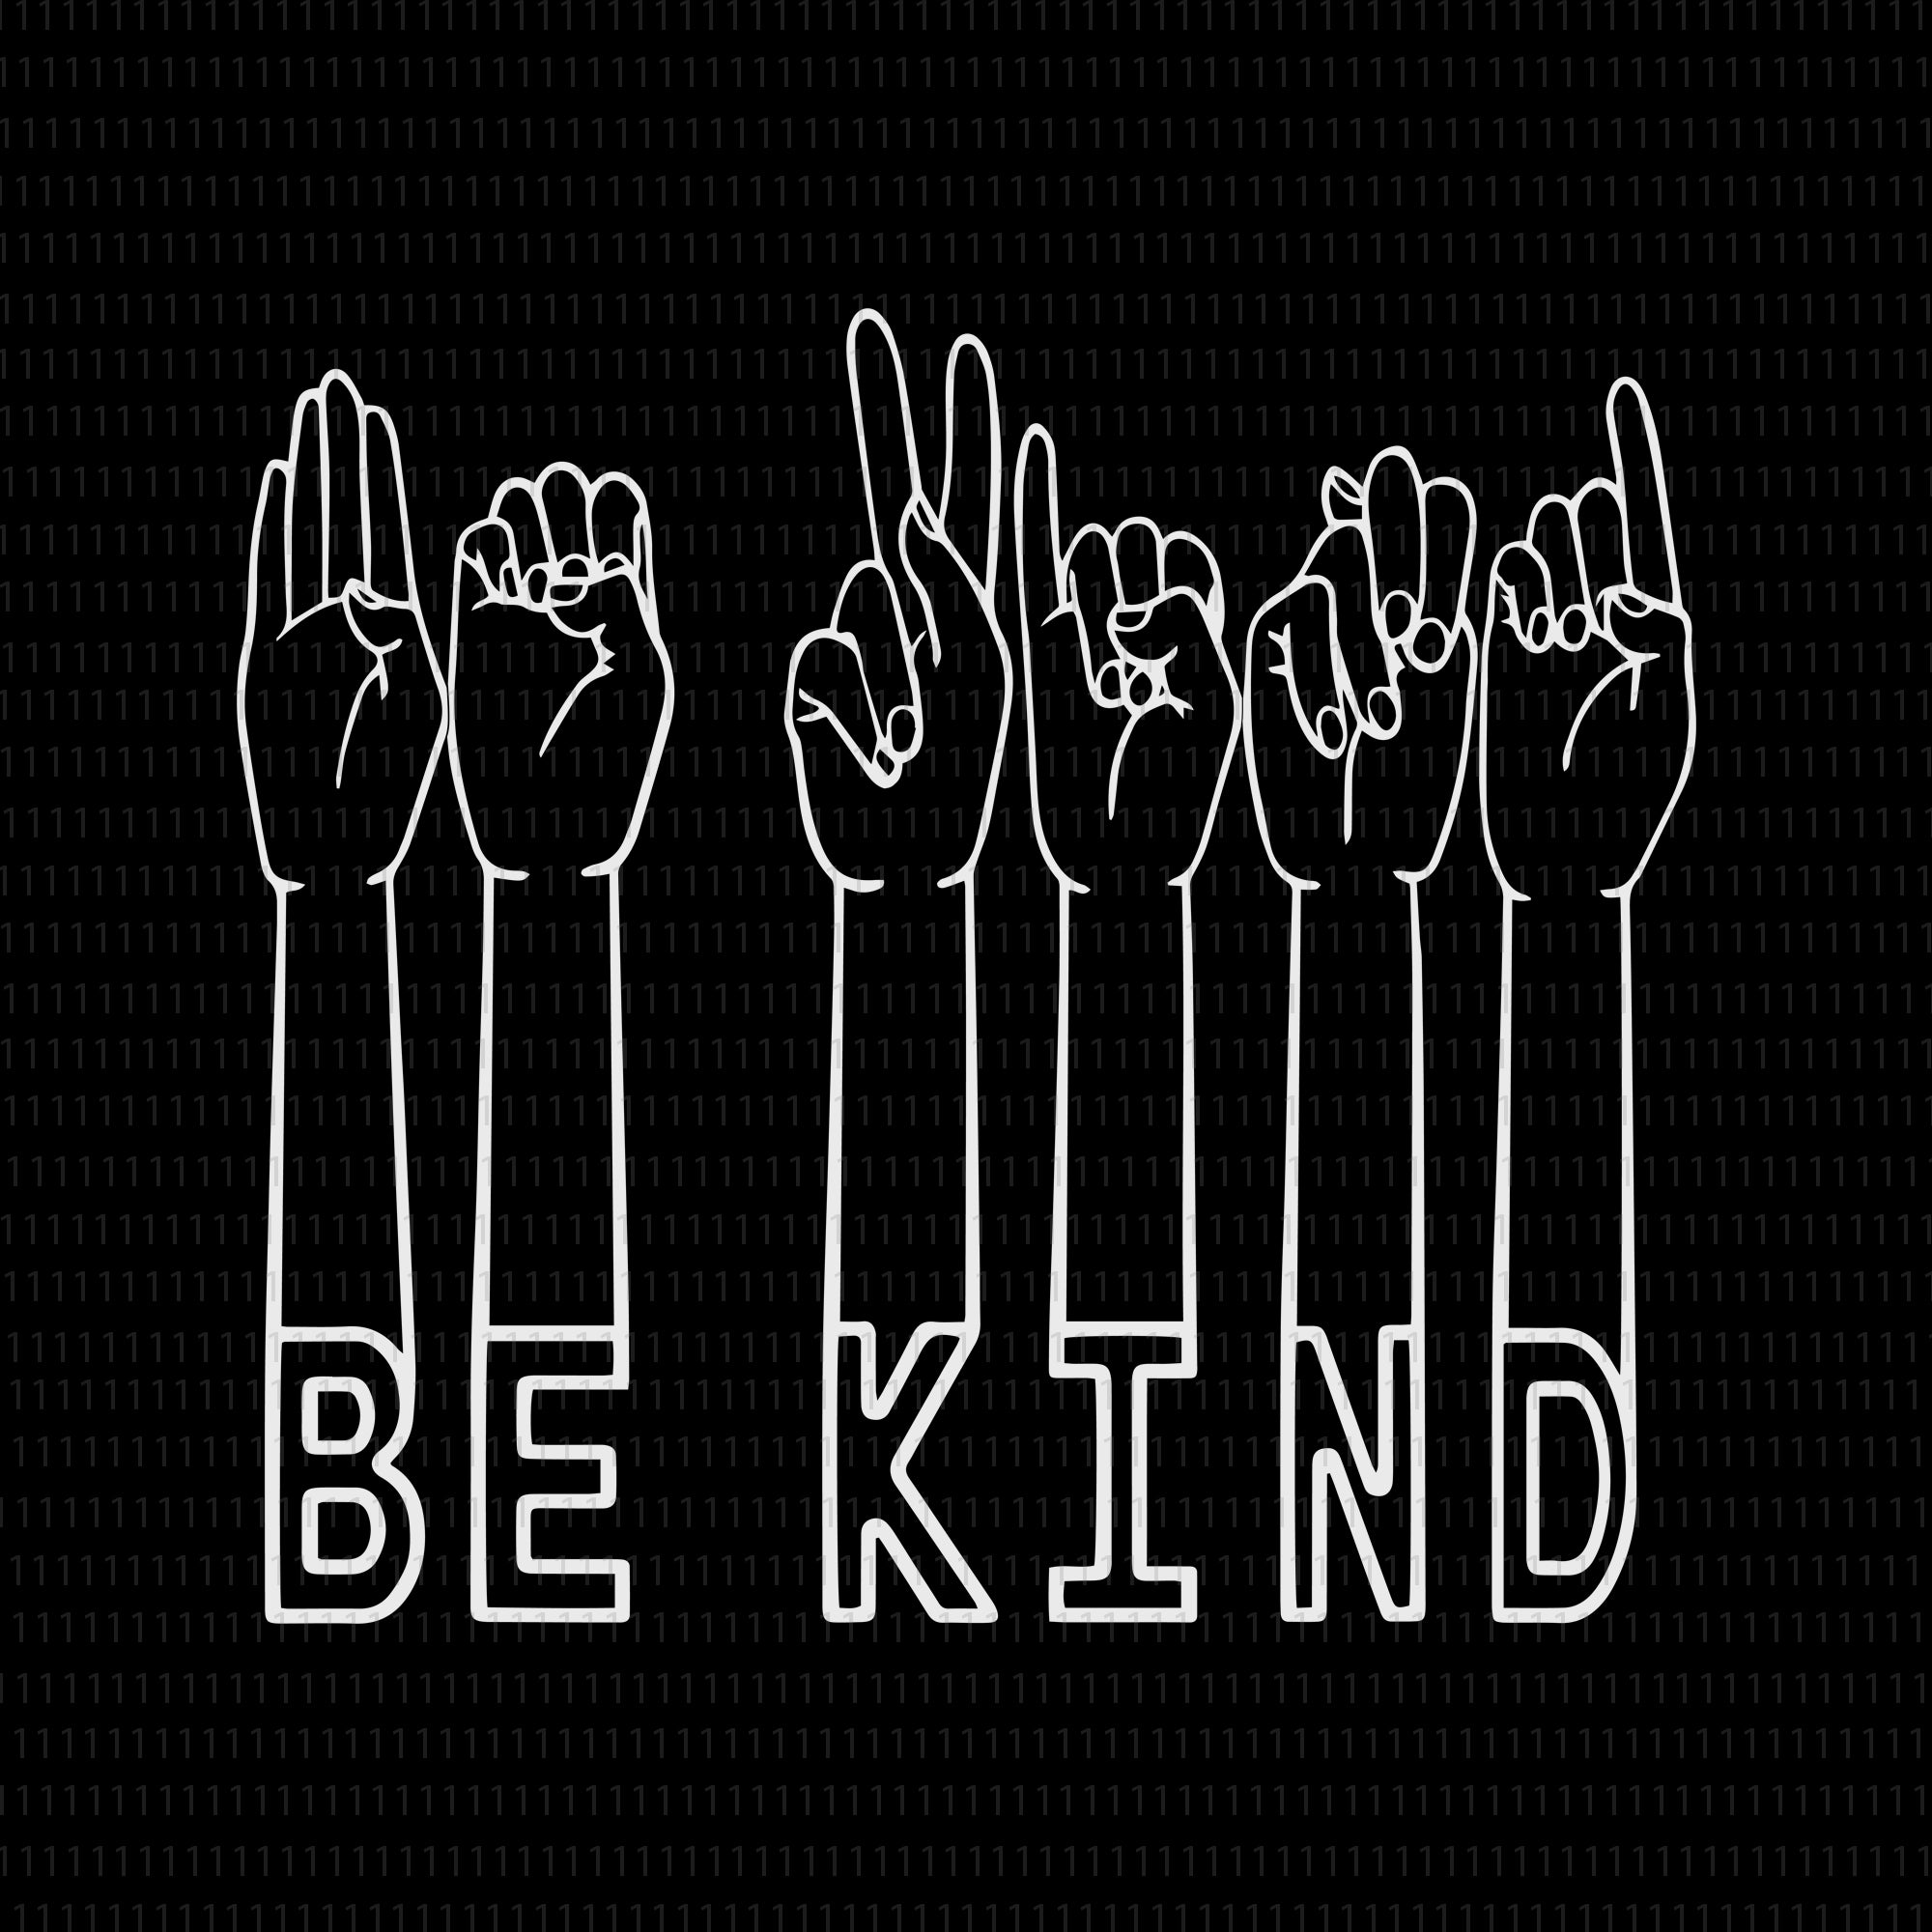 Be kind hand svg, be kind hand, Bee Happy svg, Be Happy svg, Be kind svg, bee kind svg, Queen bee svg, Bee yourself svg, Be yourself svg, Bee svg